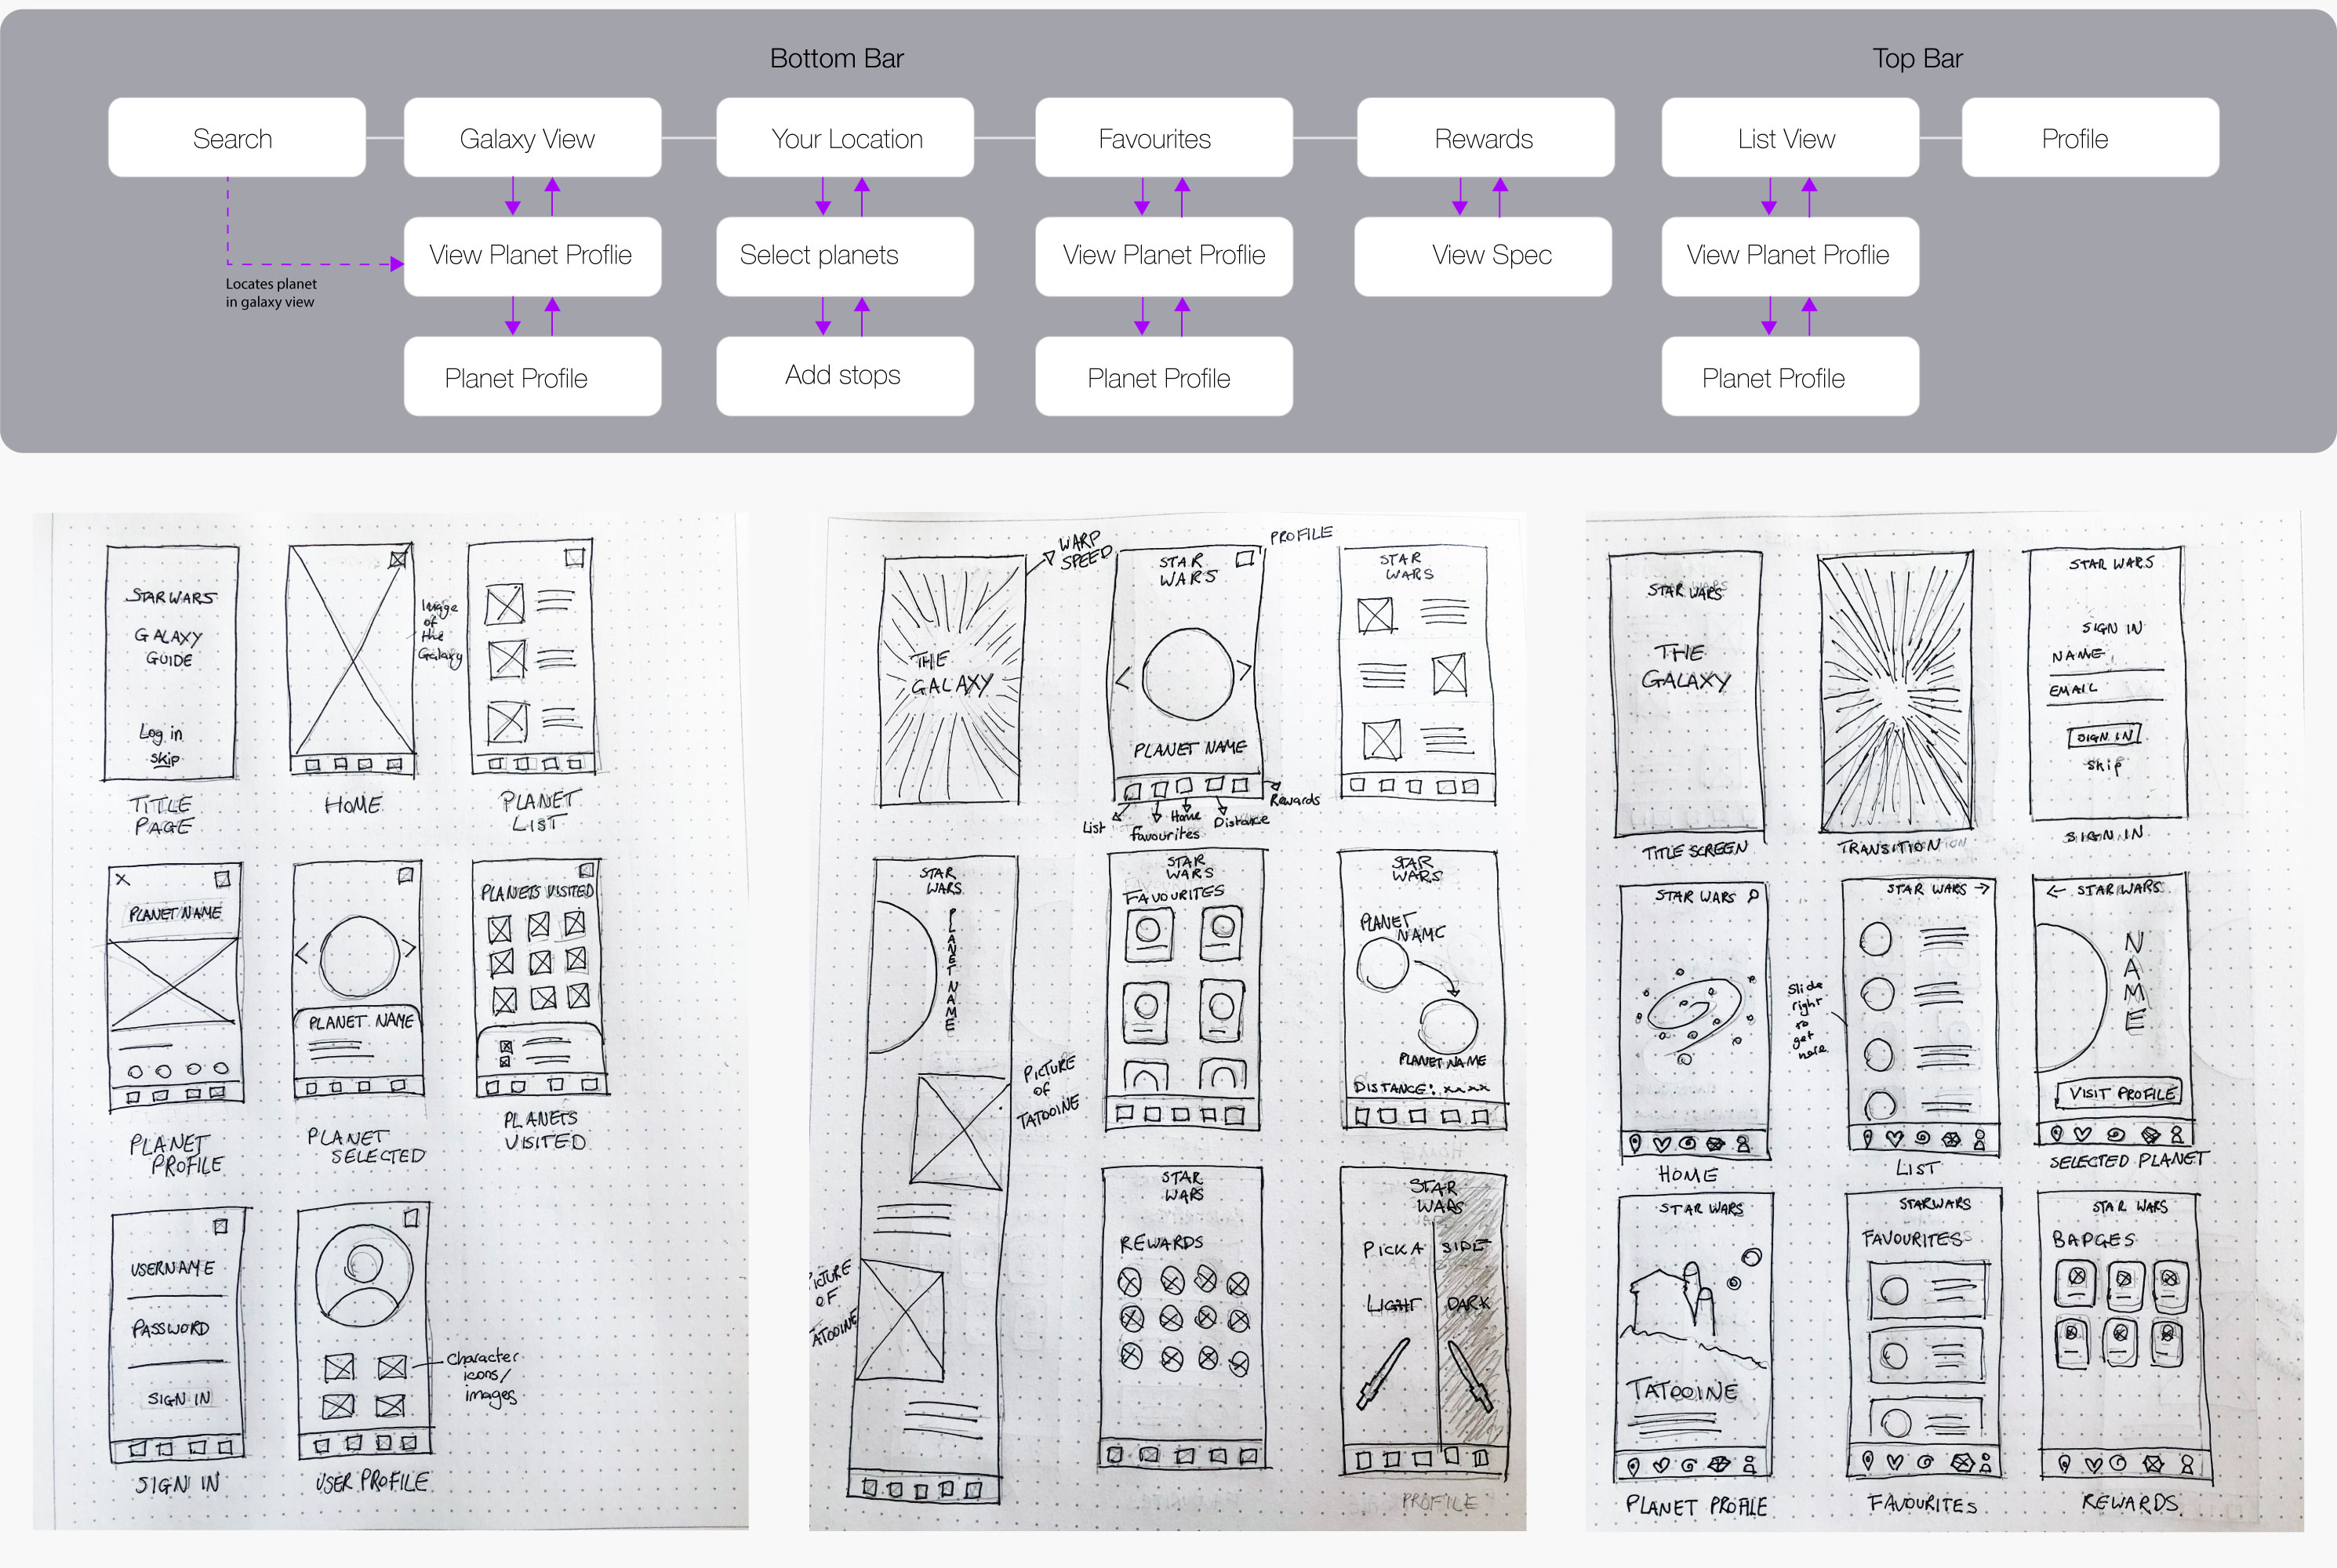 Wireframes and navigation flow